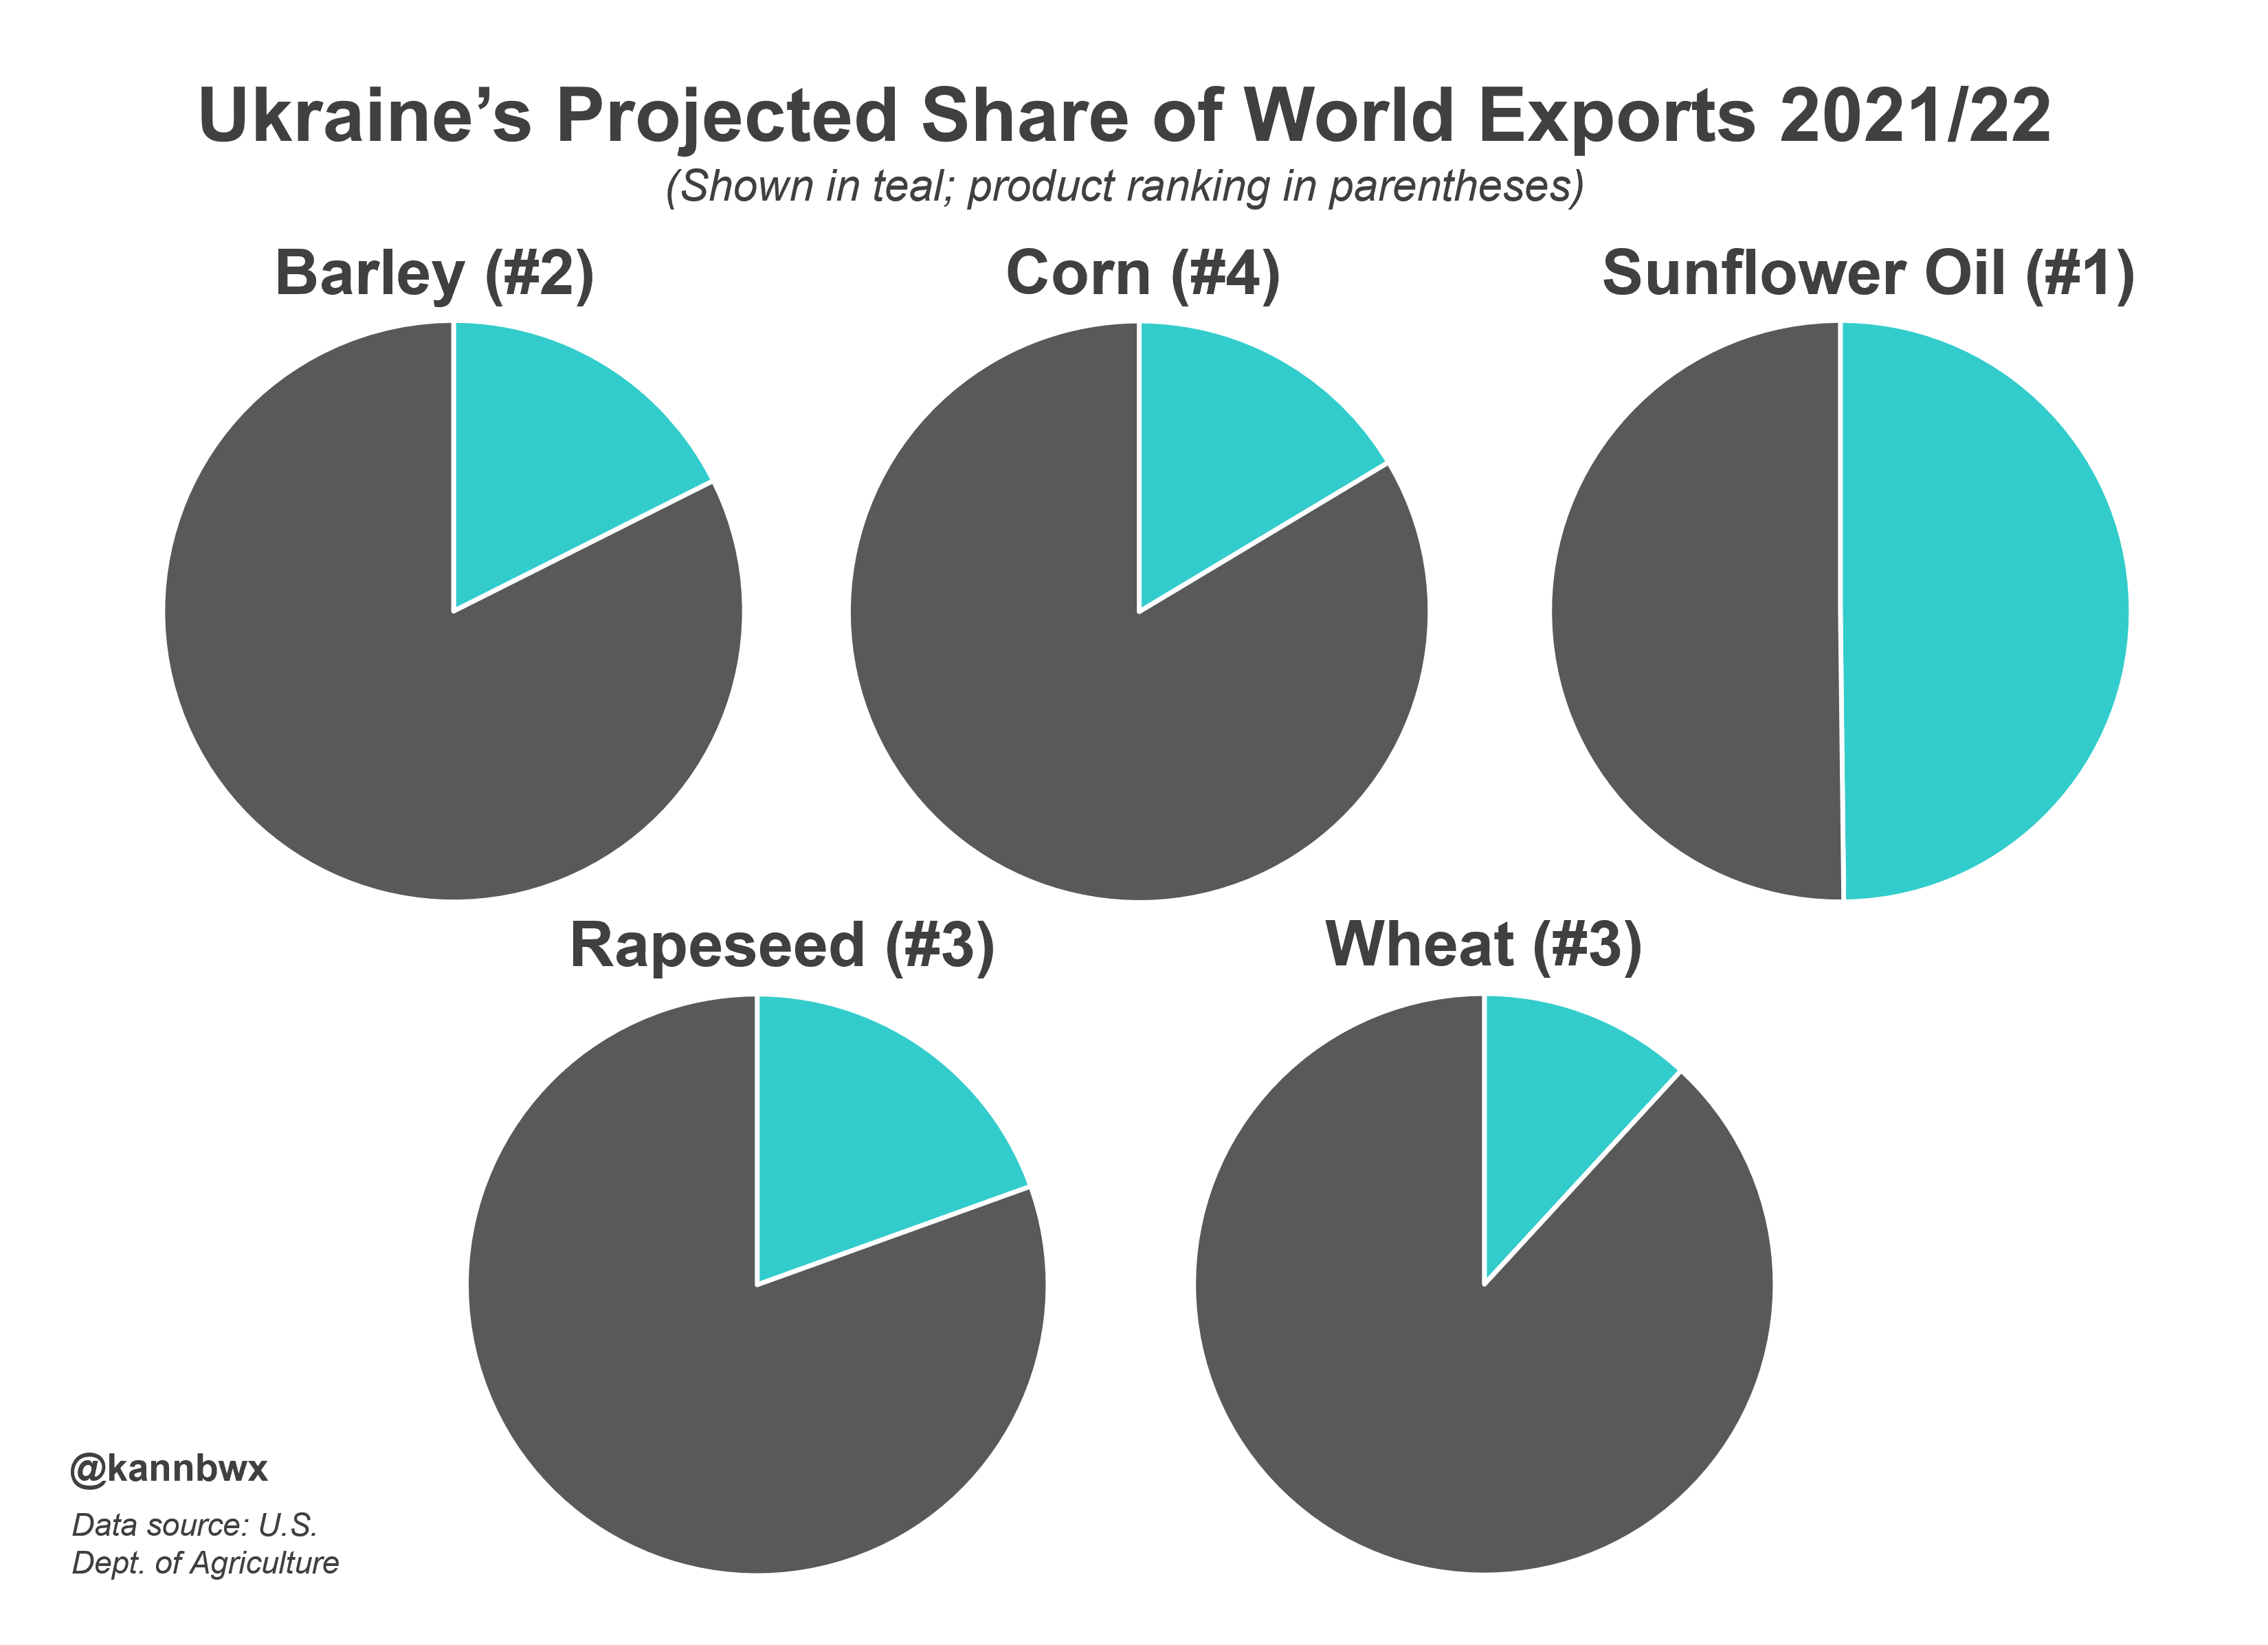 Ukraine's share of agricultural exports in 2021/22